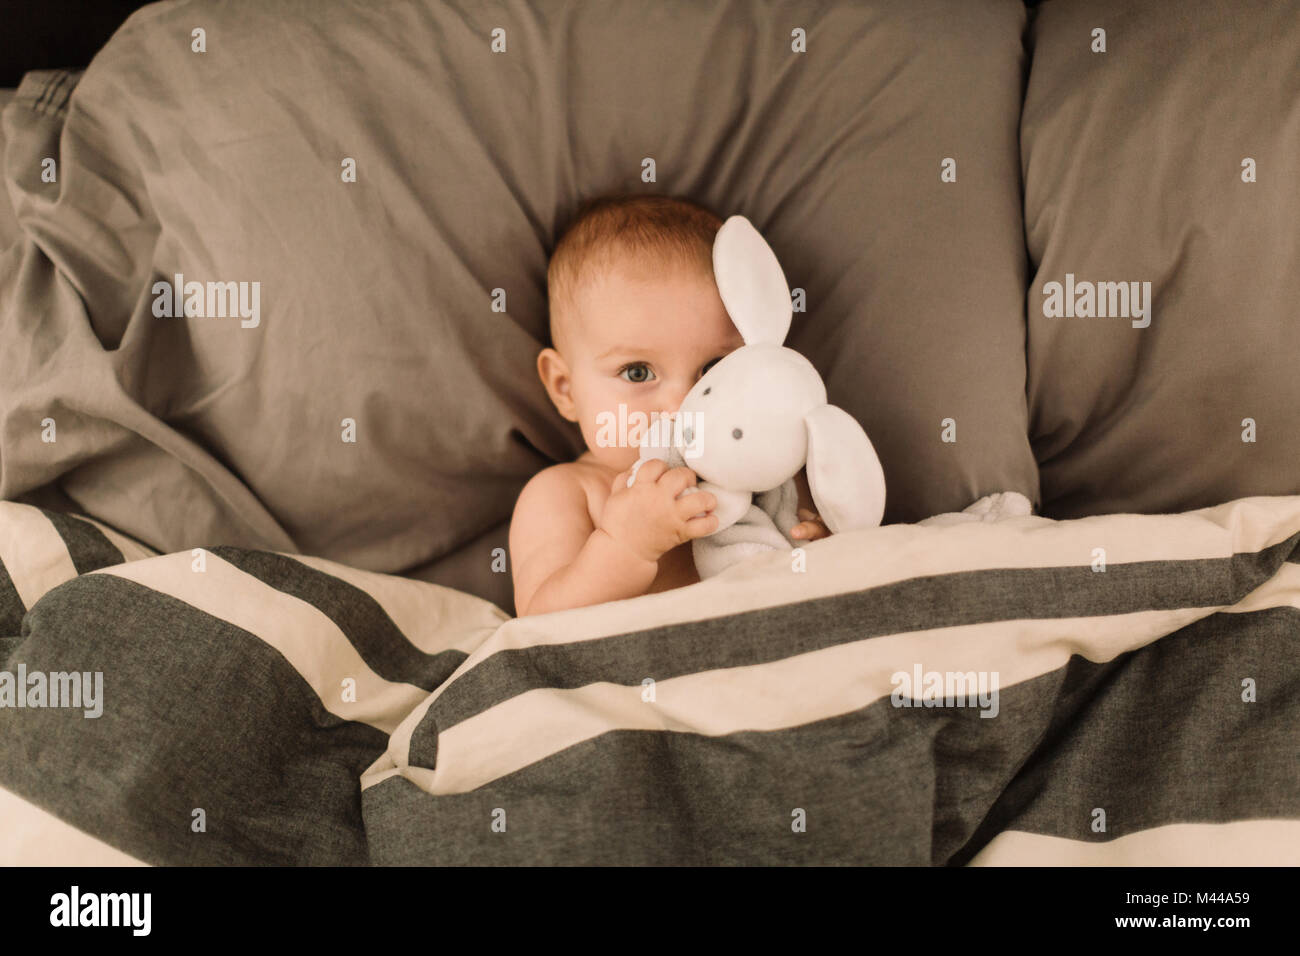 Portrait of baby girl lying in bed hugging toy rabbit, overhead view Stock Photo